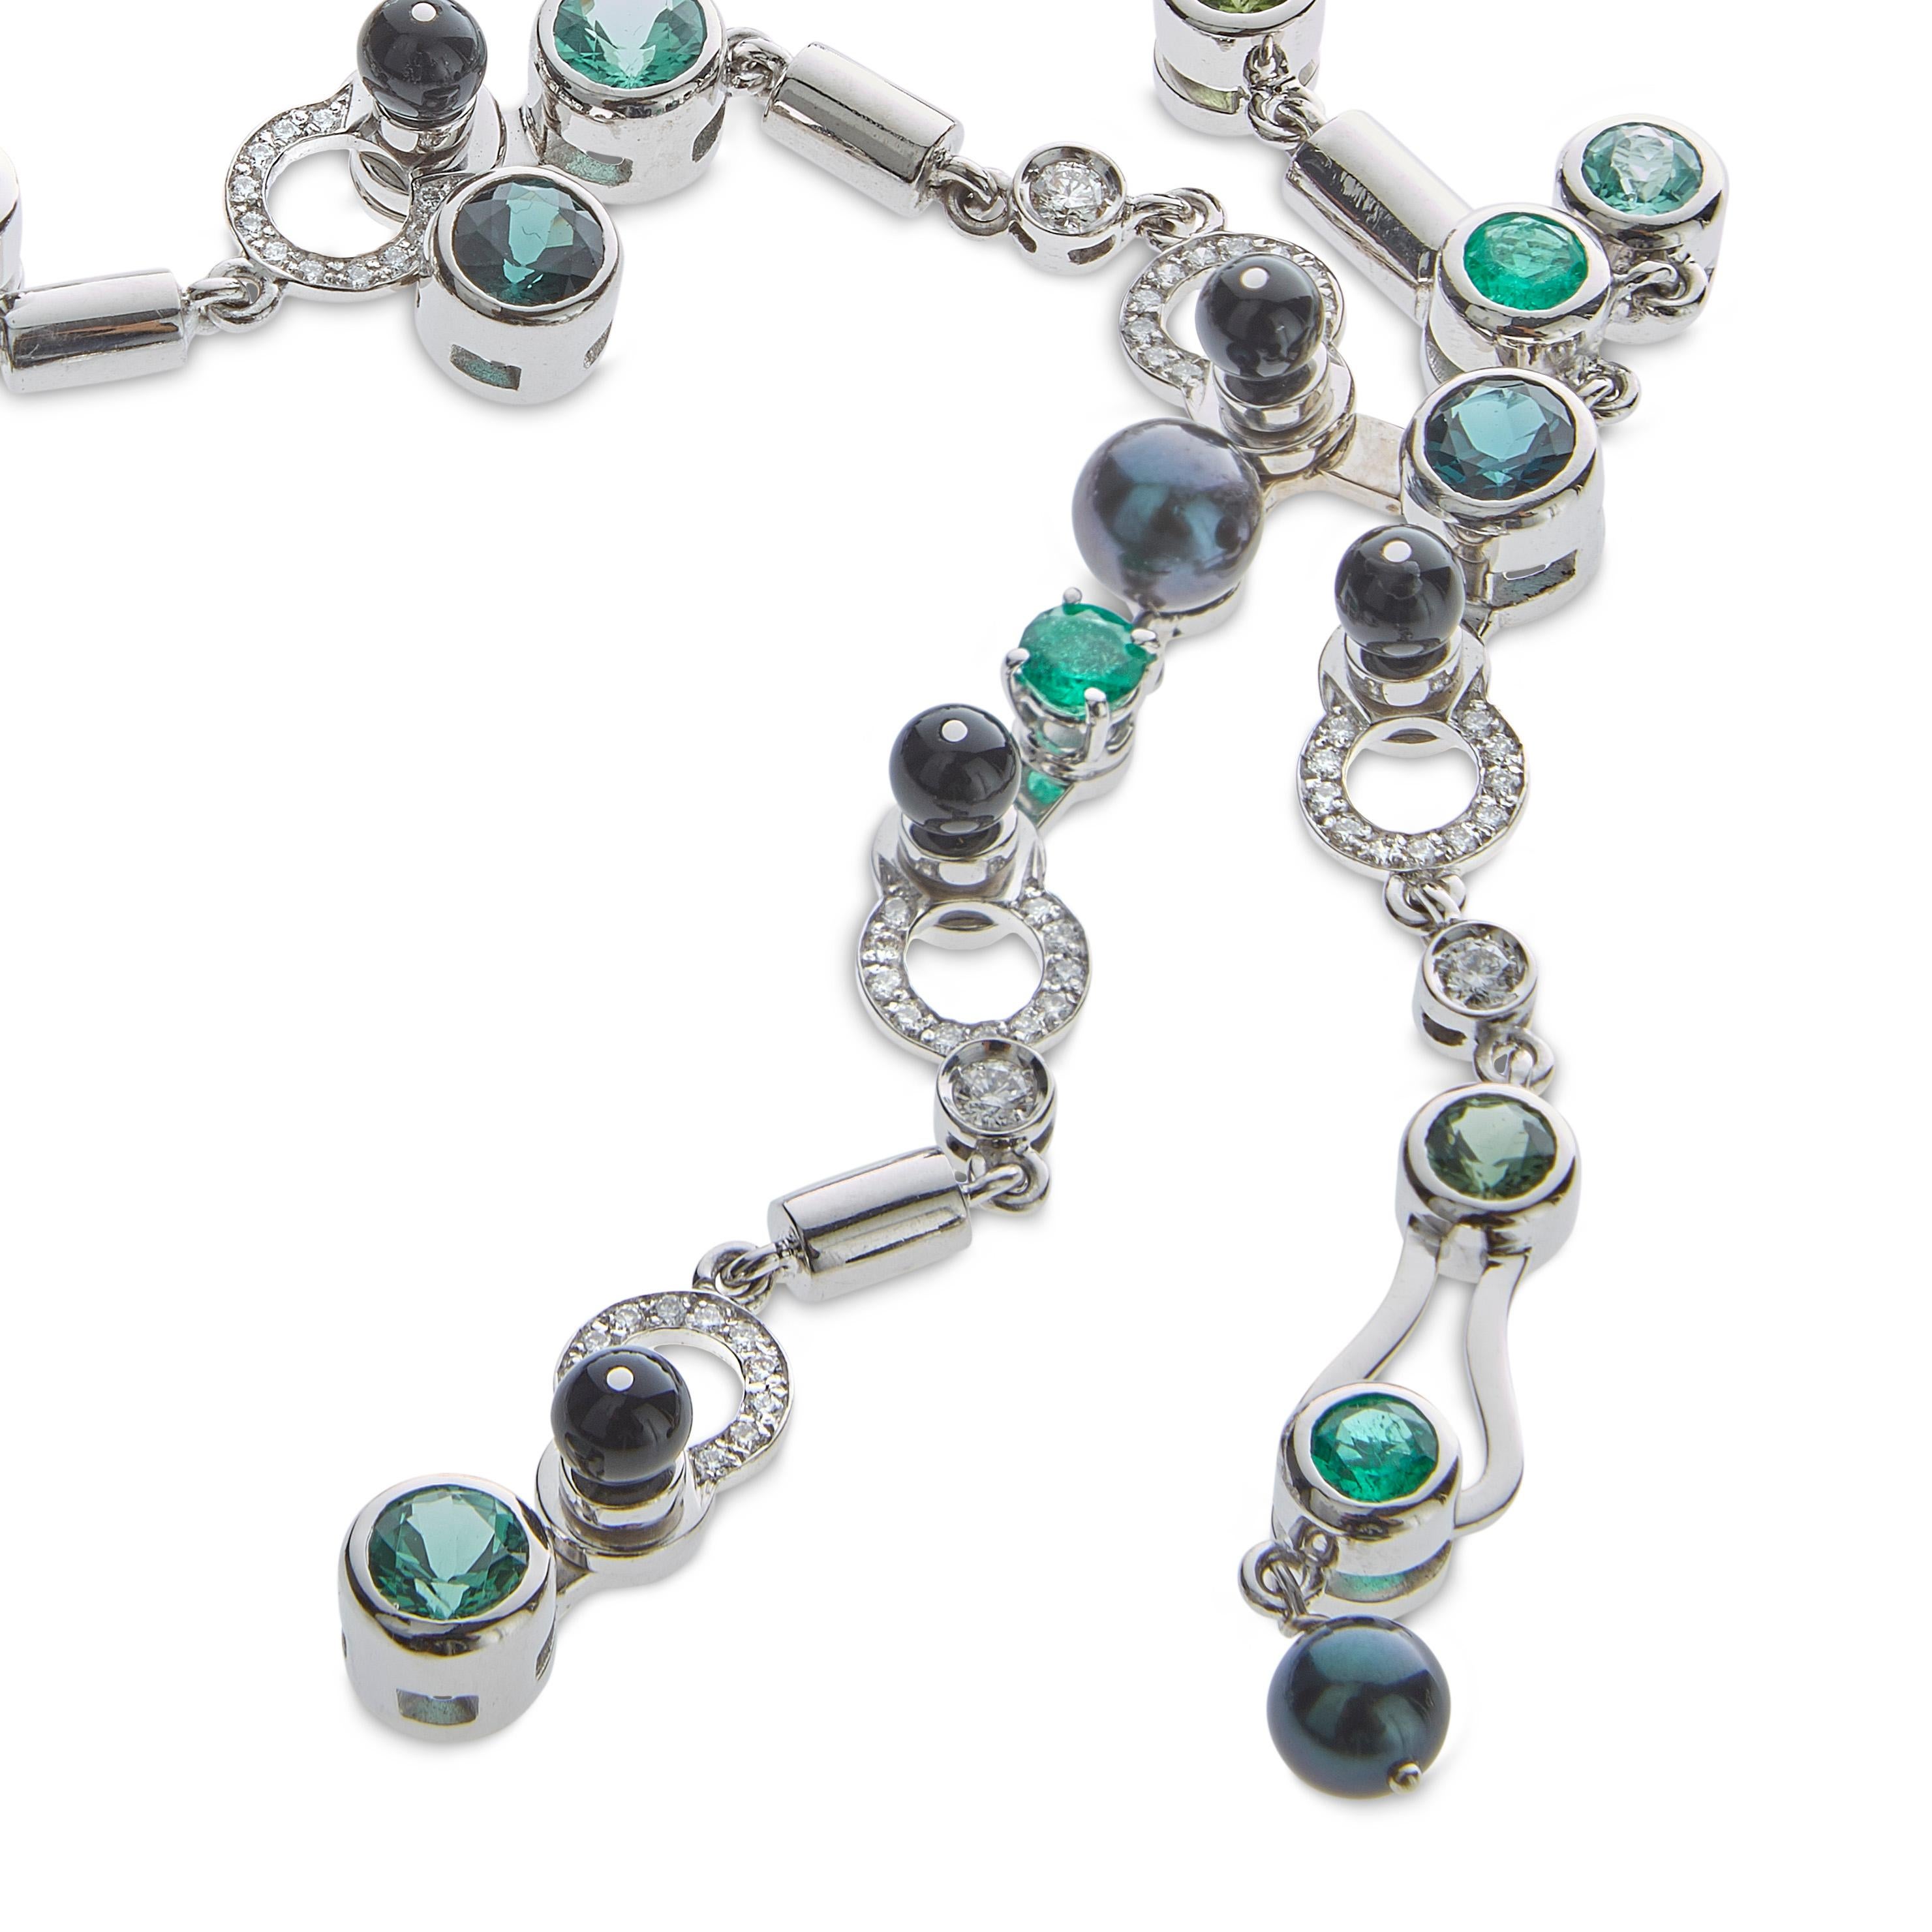 Contemporary Nathalie Jean 0.79 Carat Diamond Emerald Tourmaline Pearl Onyx Gold Necklace For Sale